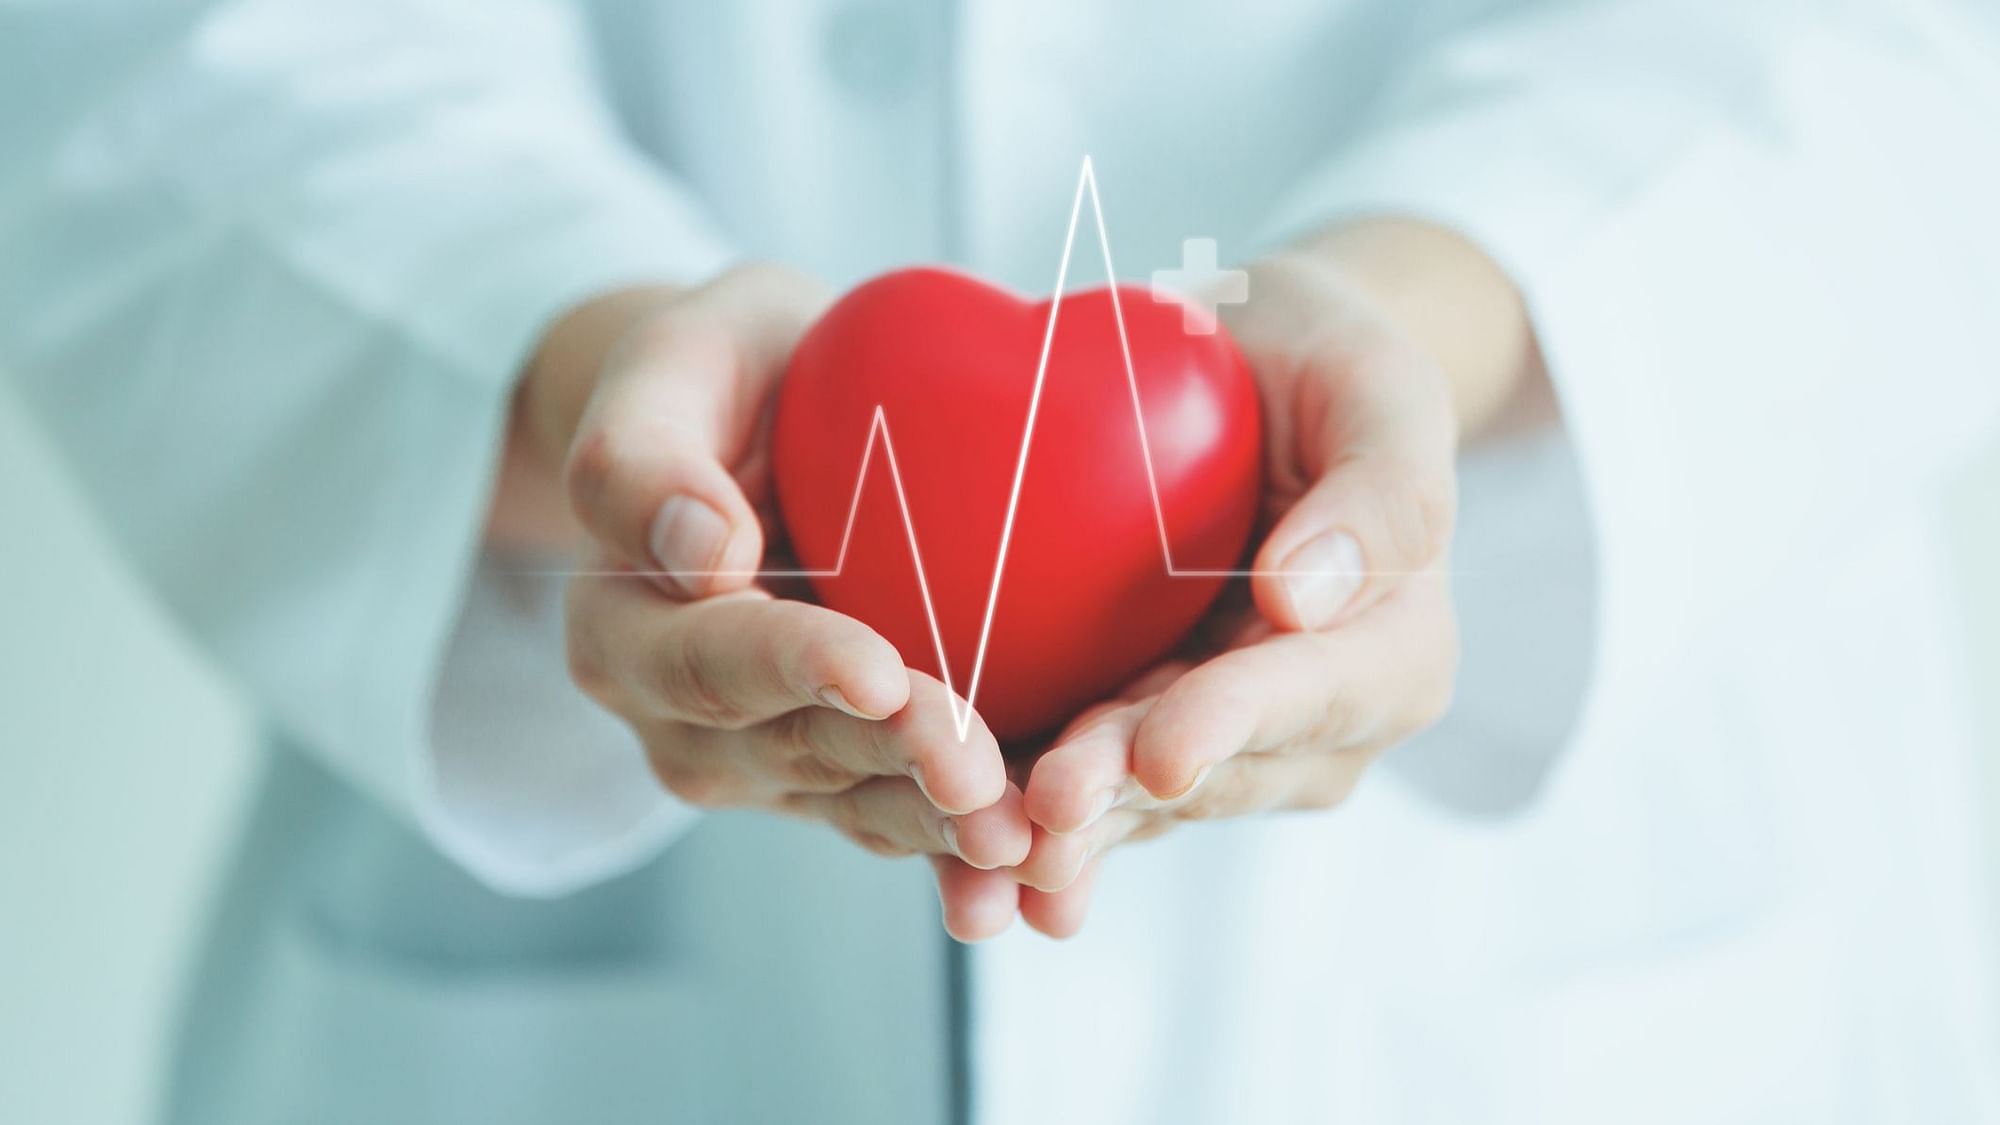 Pharmacist-led interventions may prevent heart disease.